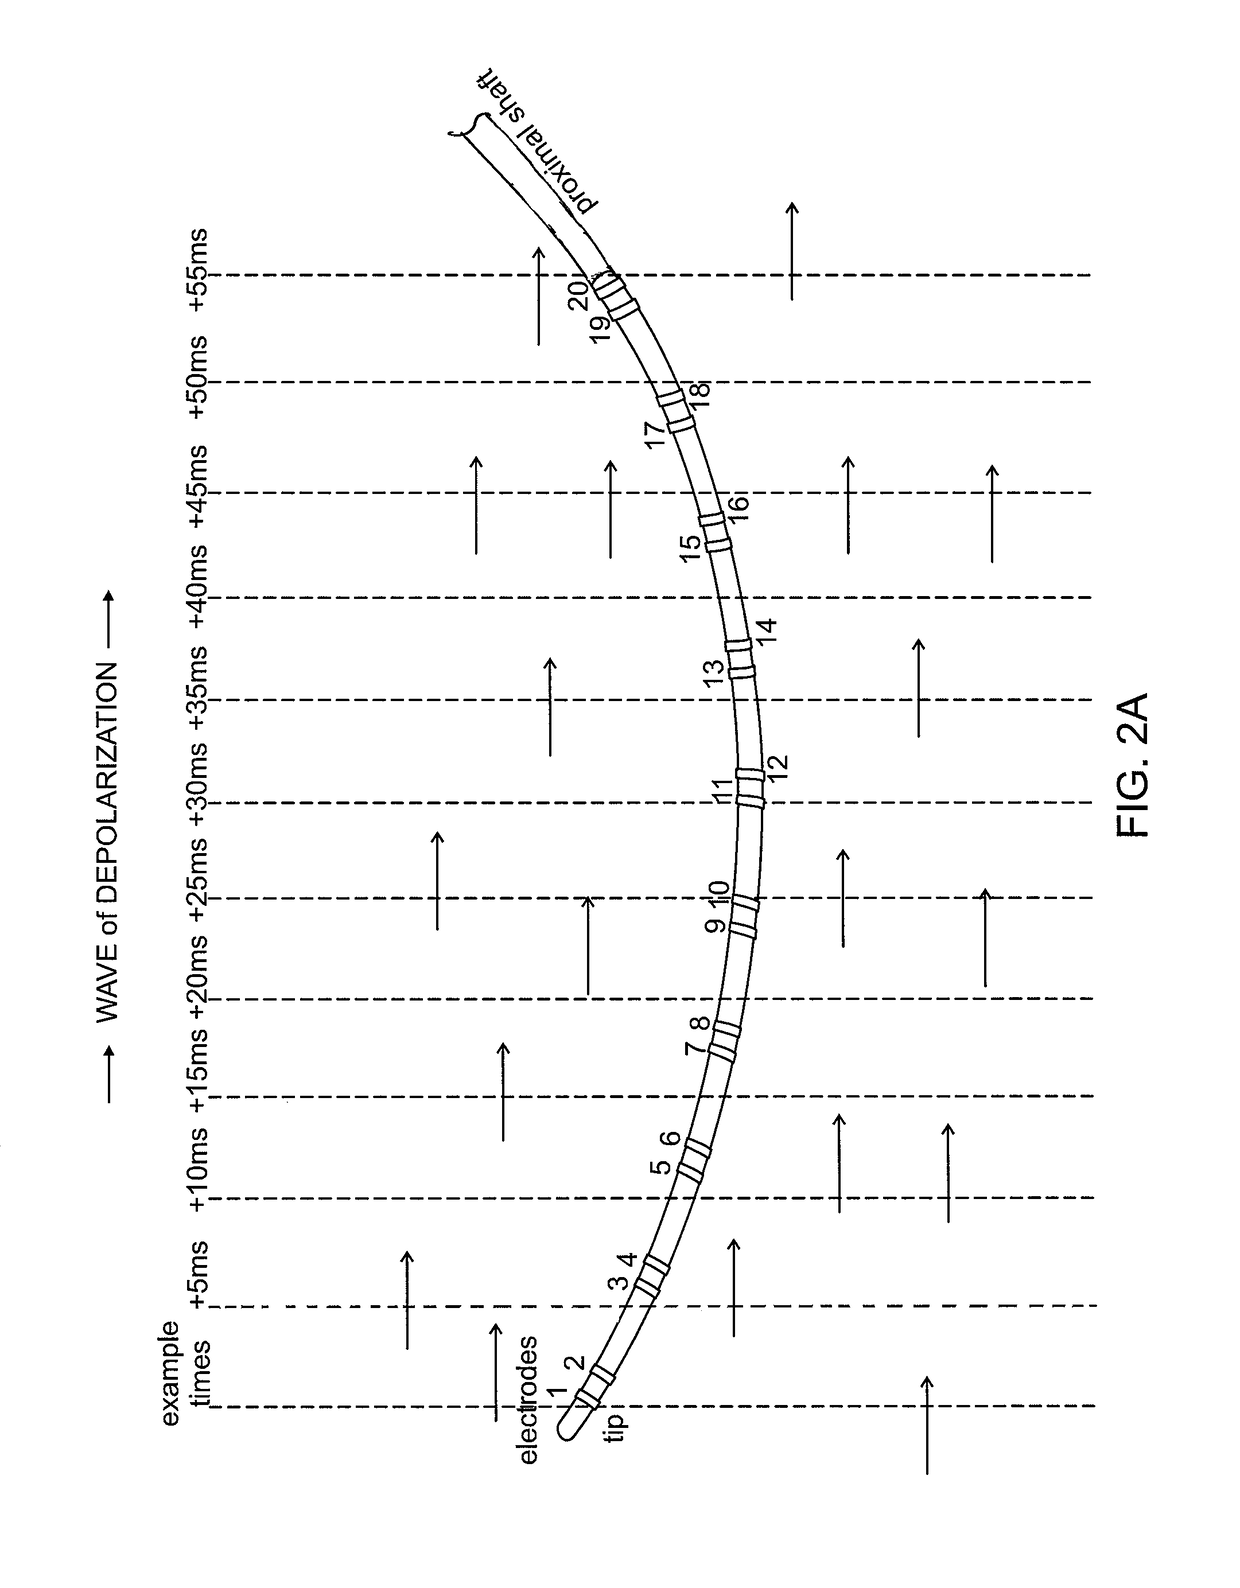 System and method for visualizing electrophysiology data